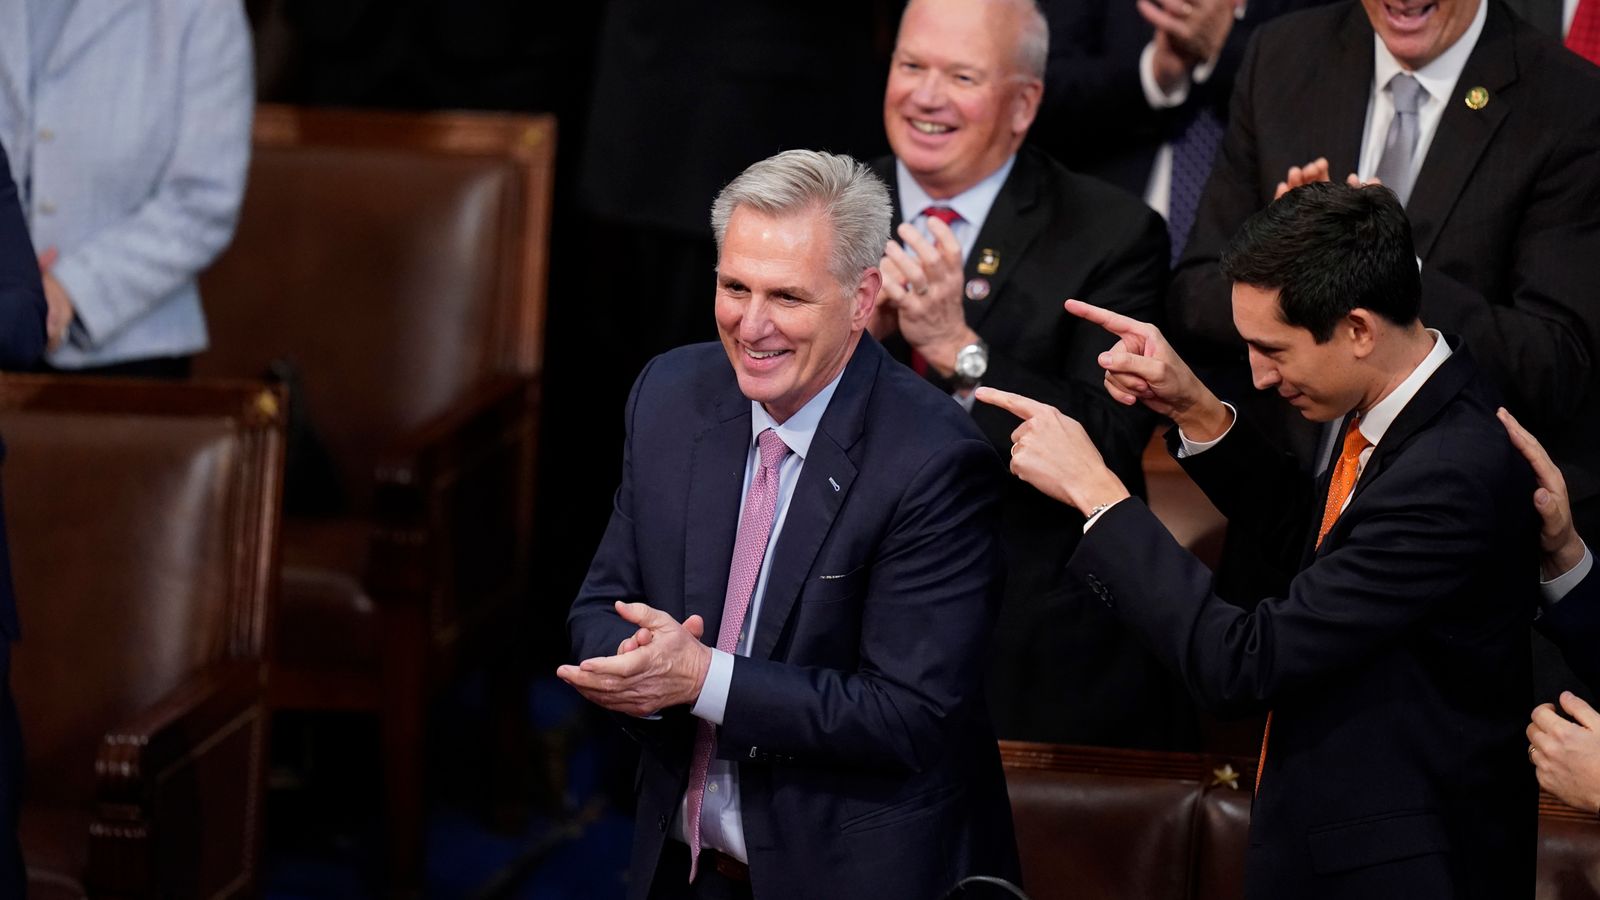 Kevin McCarthy finally wins US Speaker vote after tensions boil over in